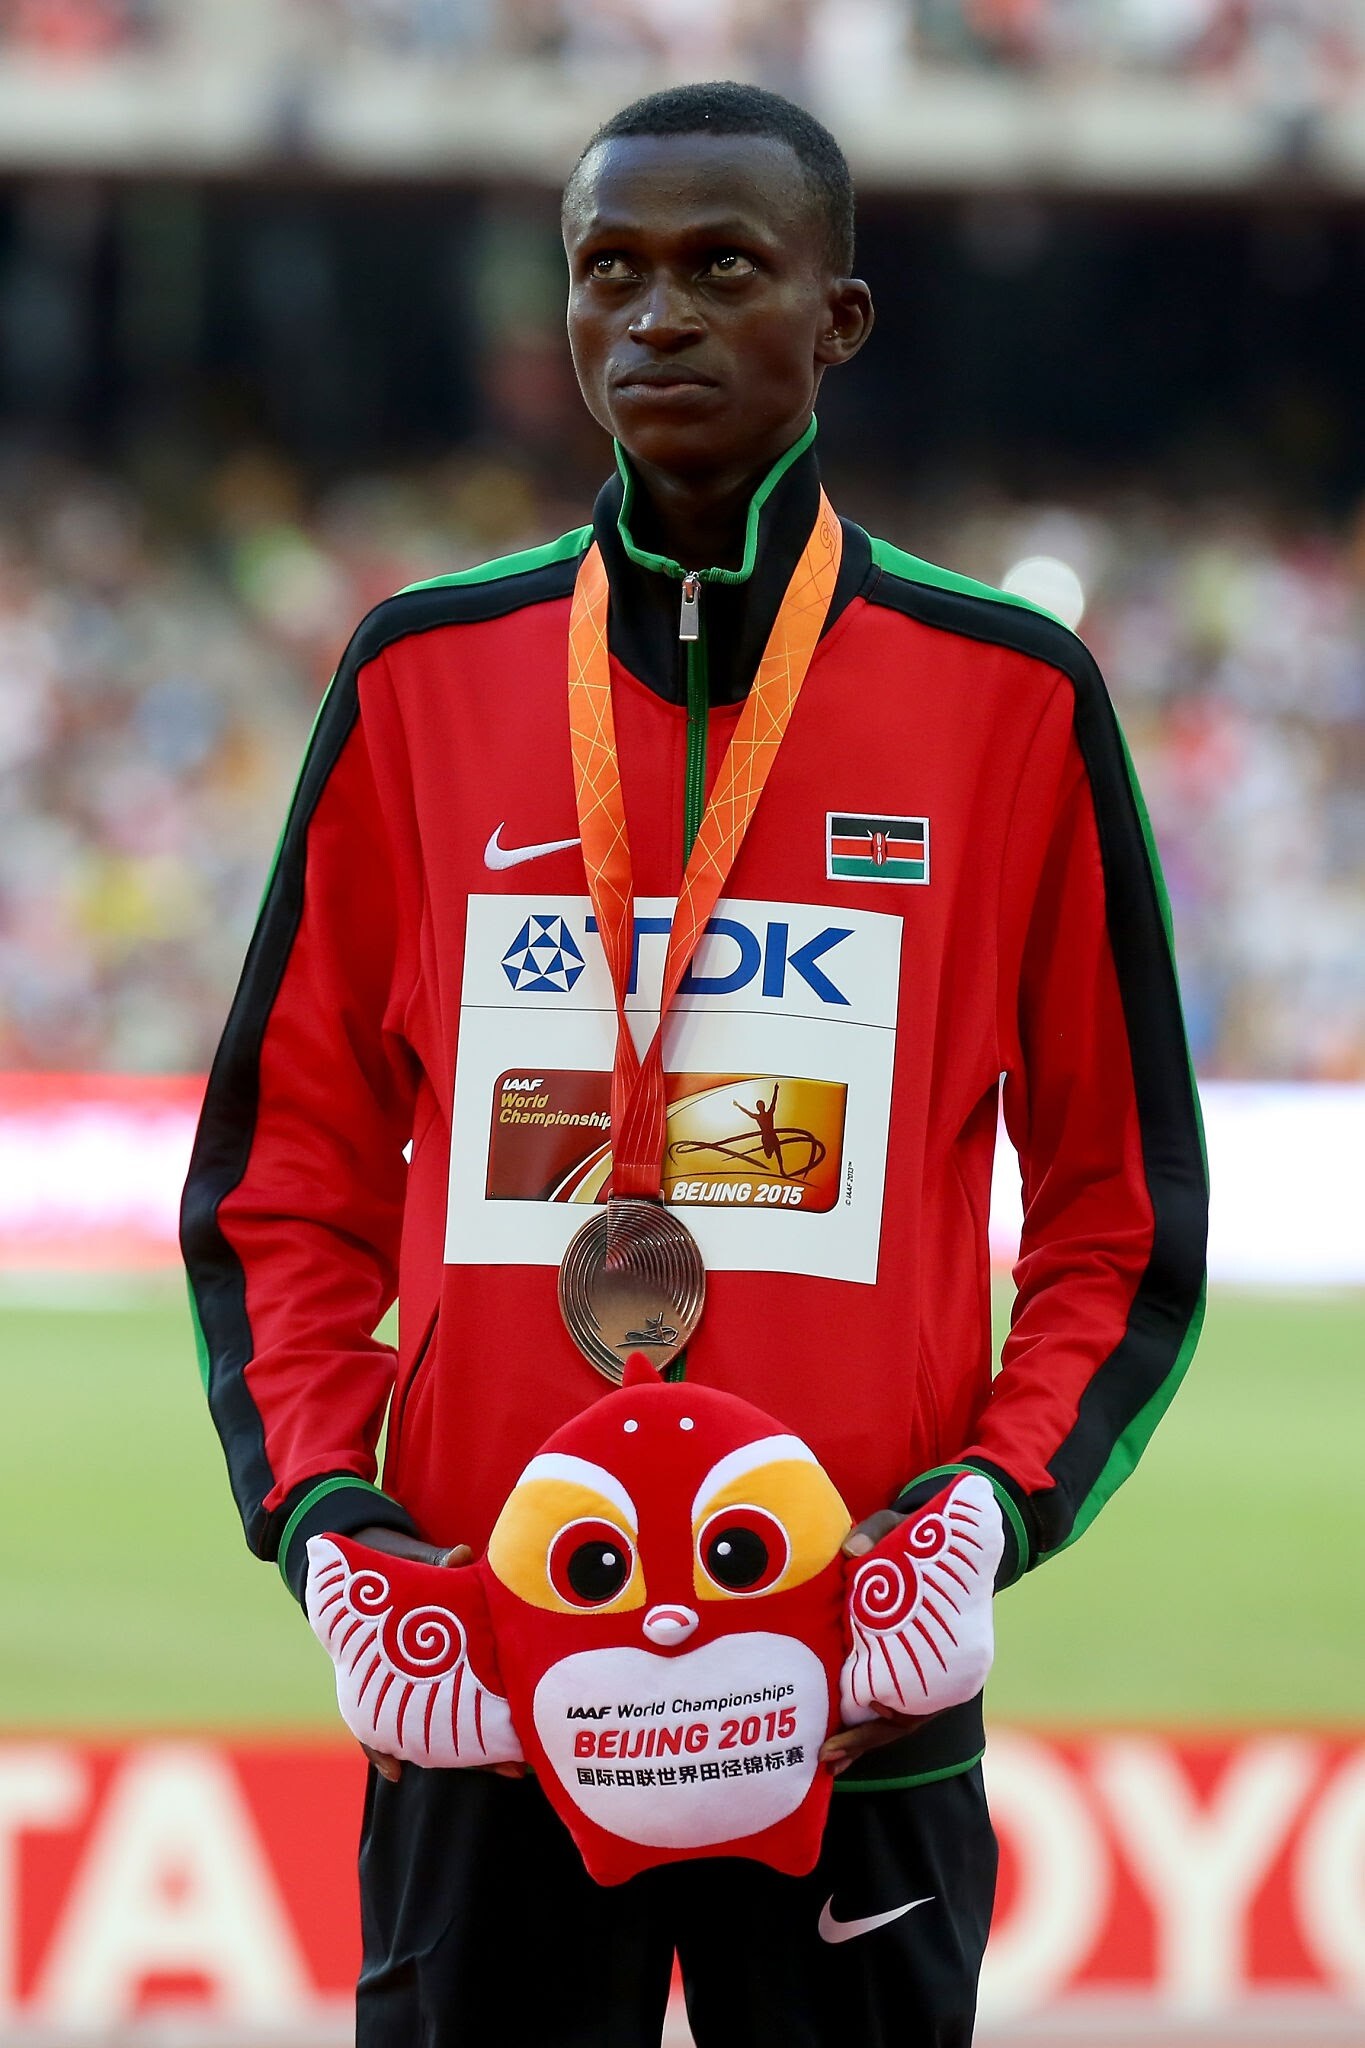 Paul Kipngetich Tanui, Running technique, Sprint finishes, Championship dreams, 1370x2050 HD Handy